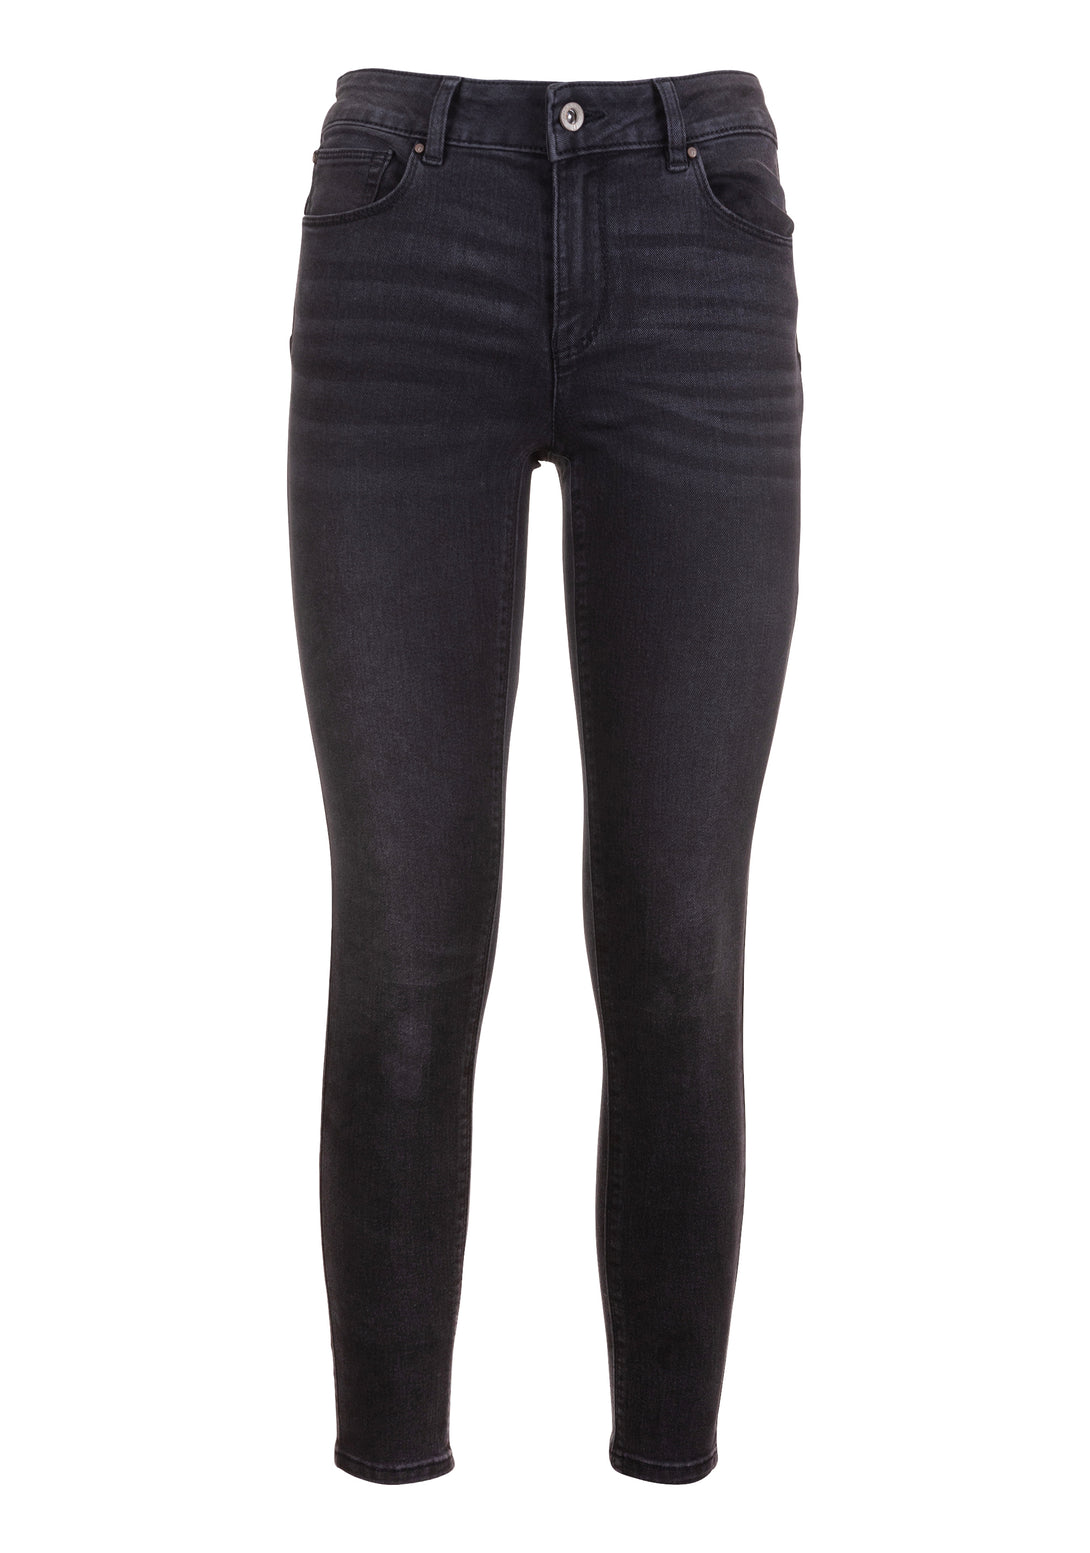 Jeans skinny fit with push-up effect made in black denim with dark wash